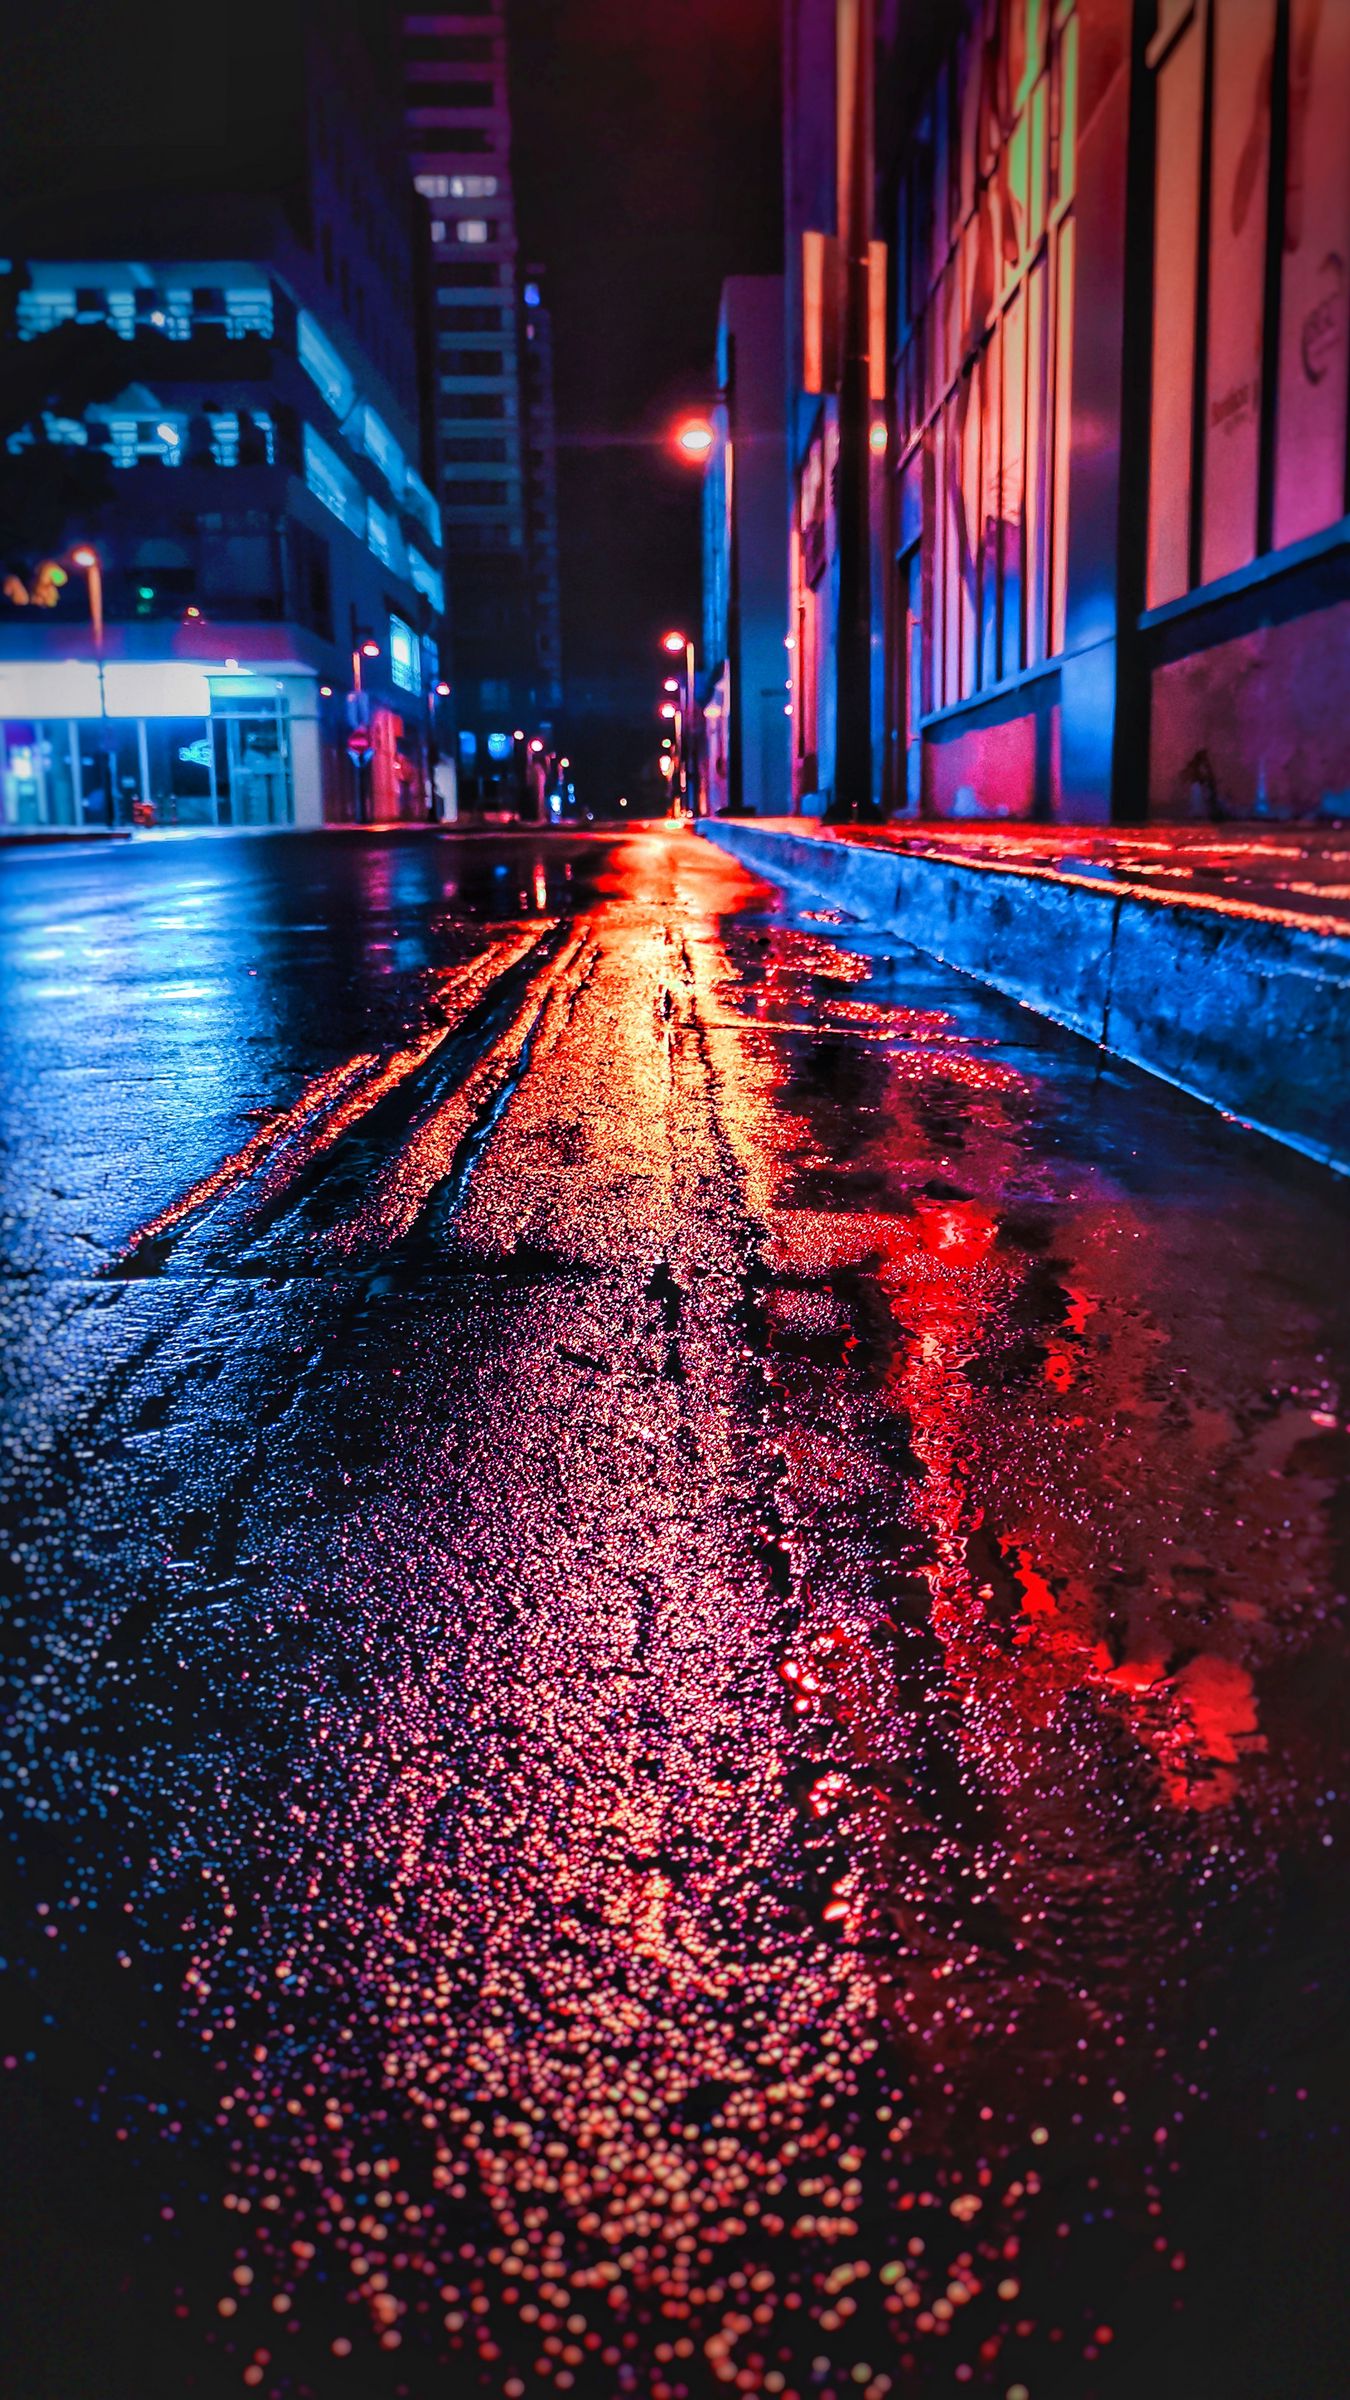 Download wallpaper 1350x2400 street, night, wet, neon, city iphone 8+/7+/6s+/for parallax HD background